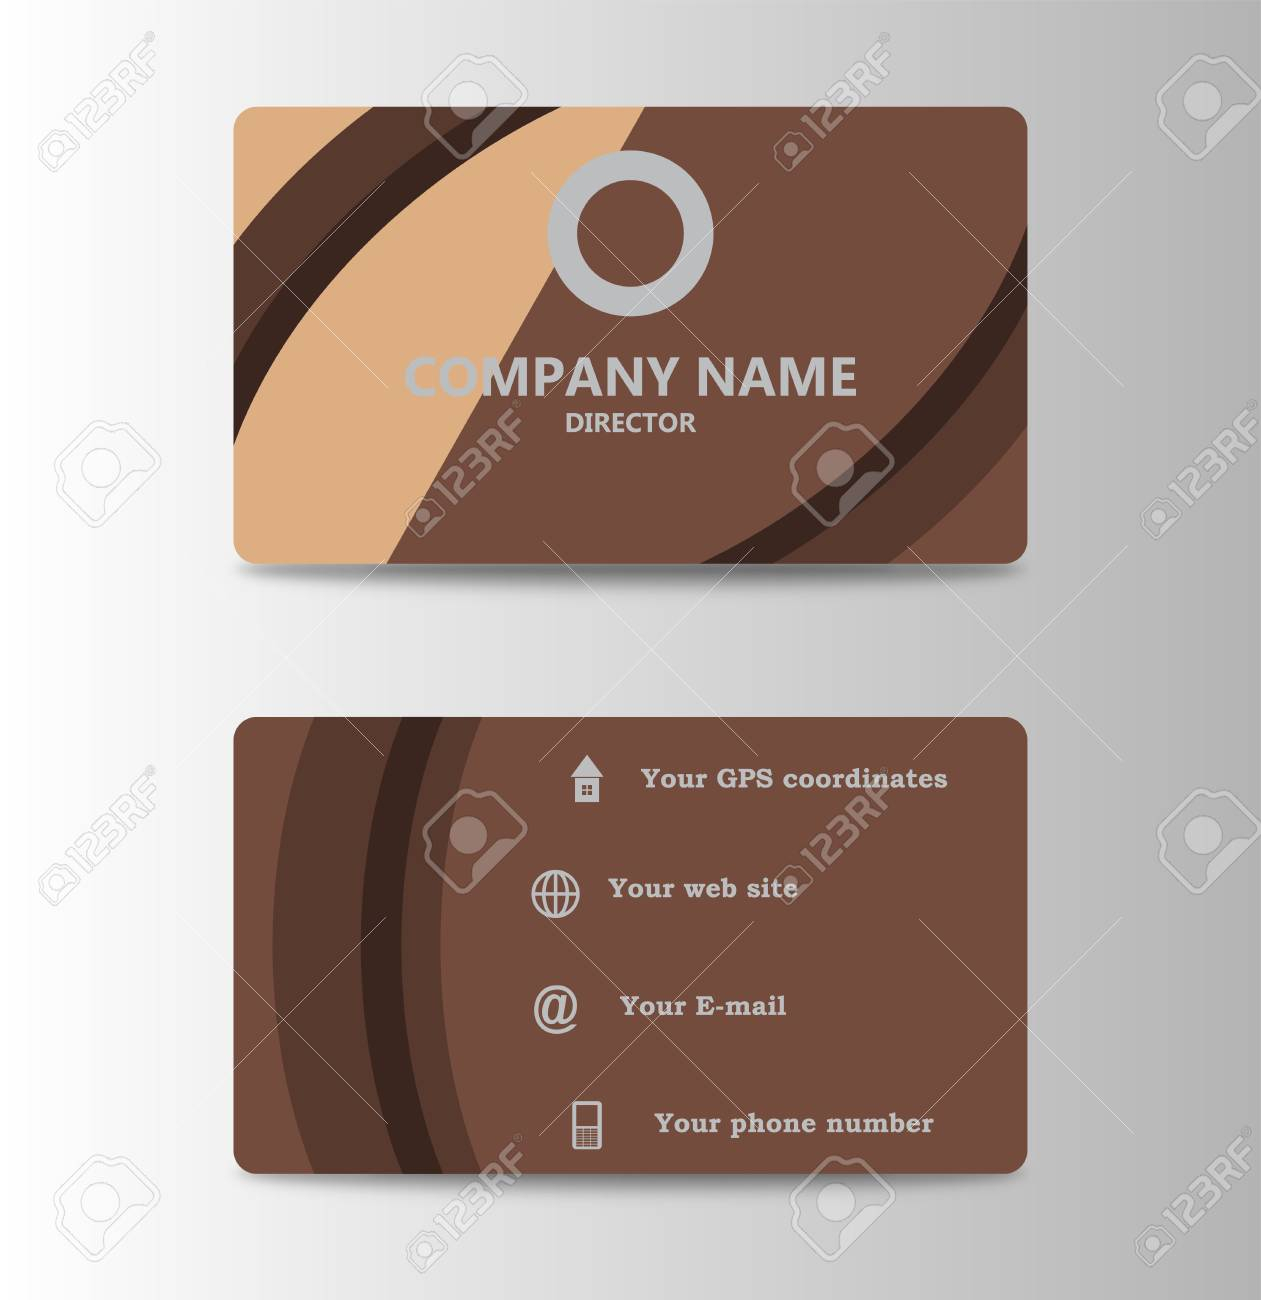 Corporate Id Card Design Template. Personal Id Card For Business.. Intended For Personal Identification Card Template